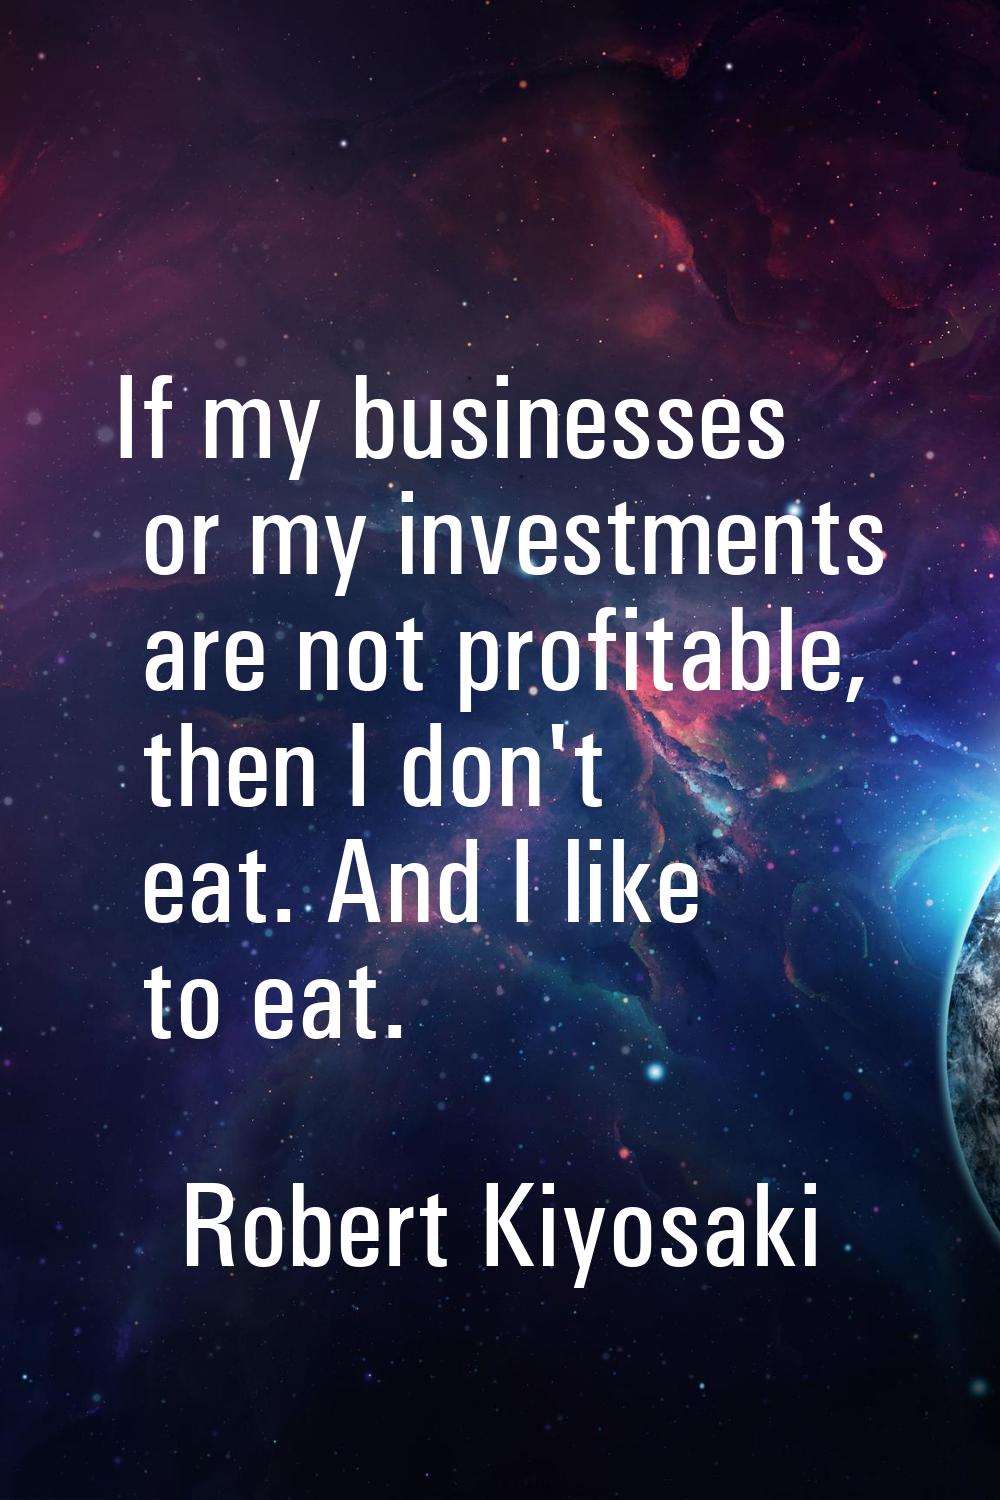 If my businesses or my investments are not profitable, then I don't eat. And I like to eat.